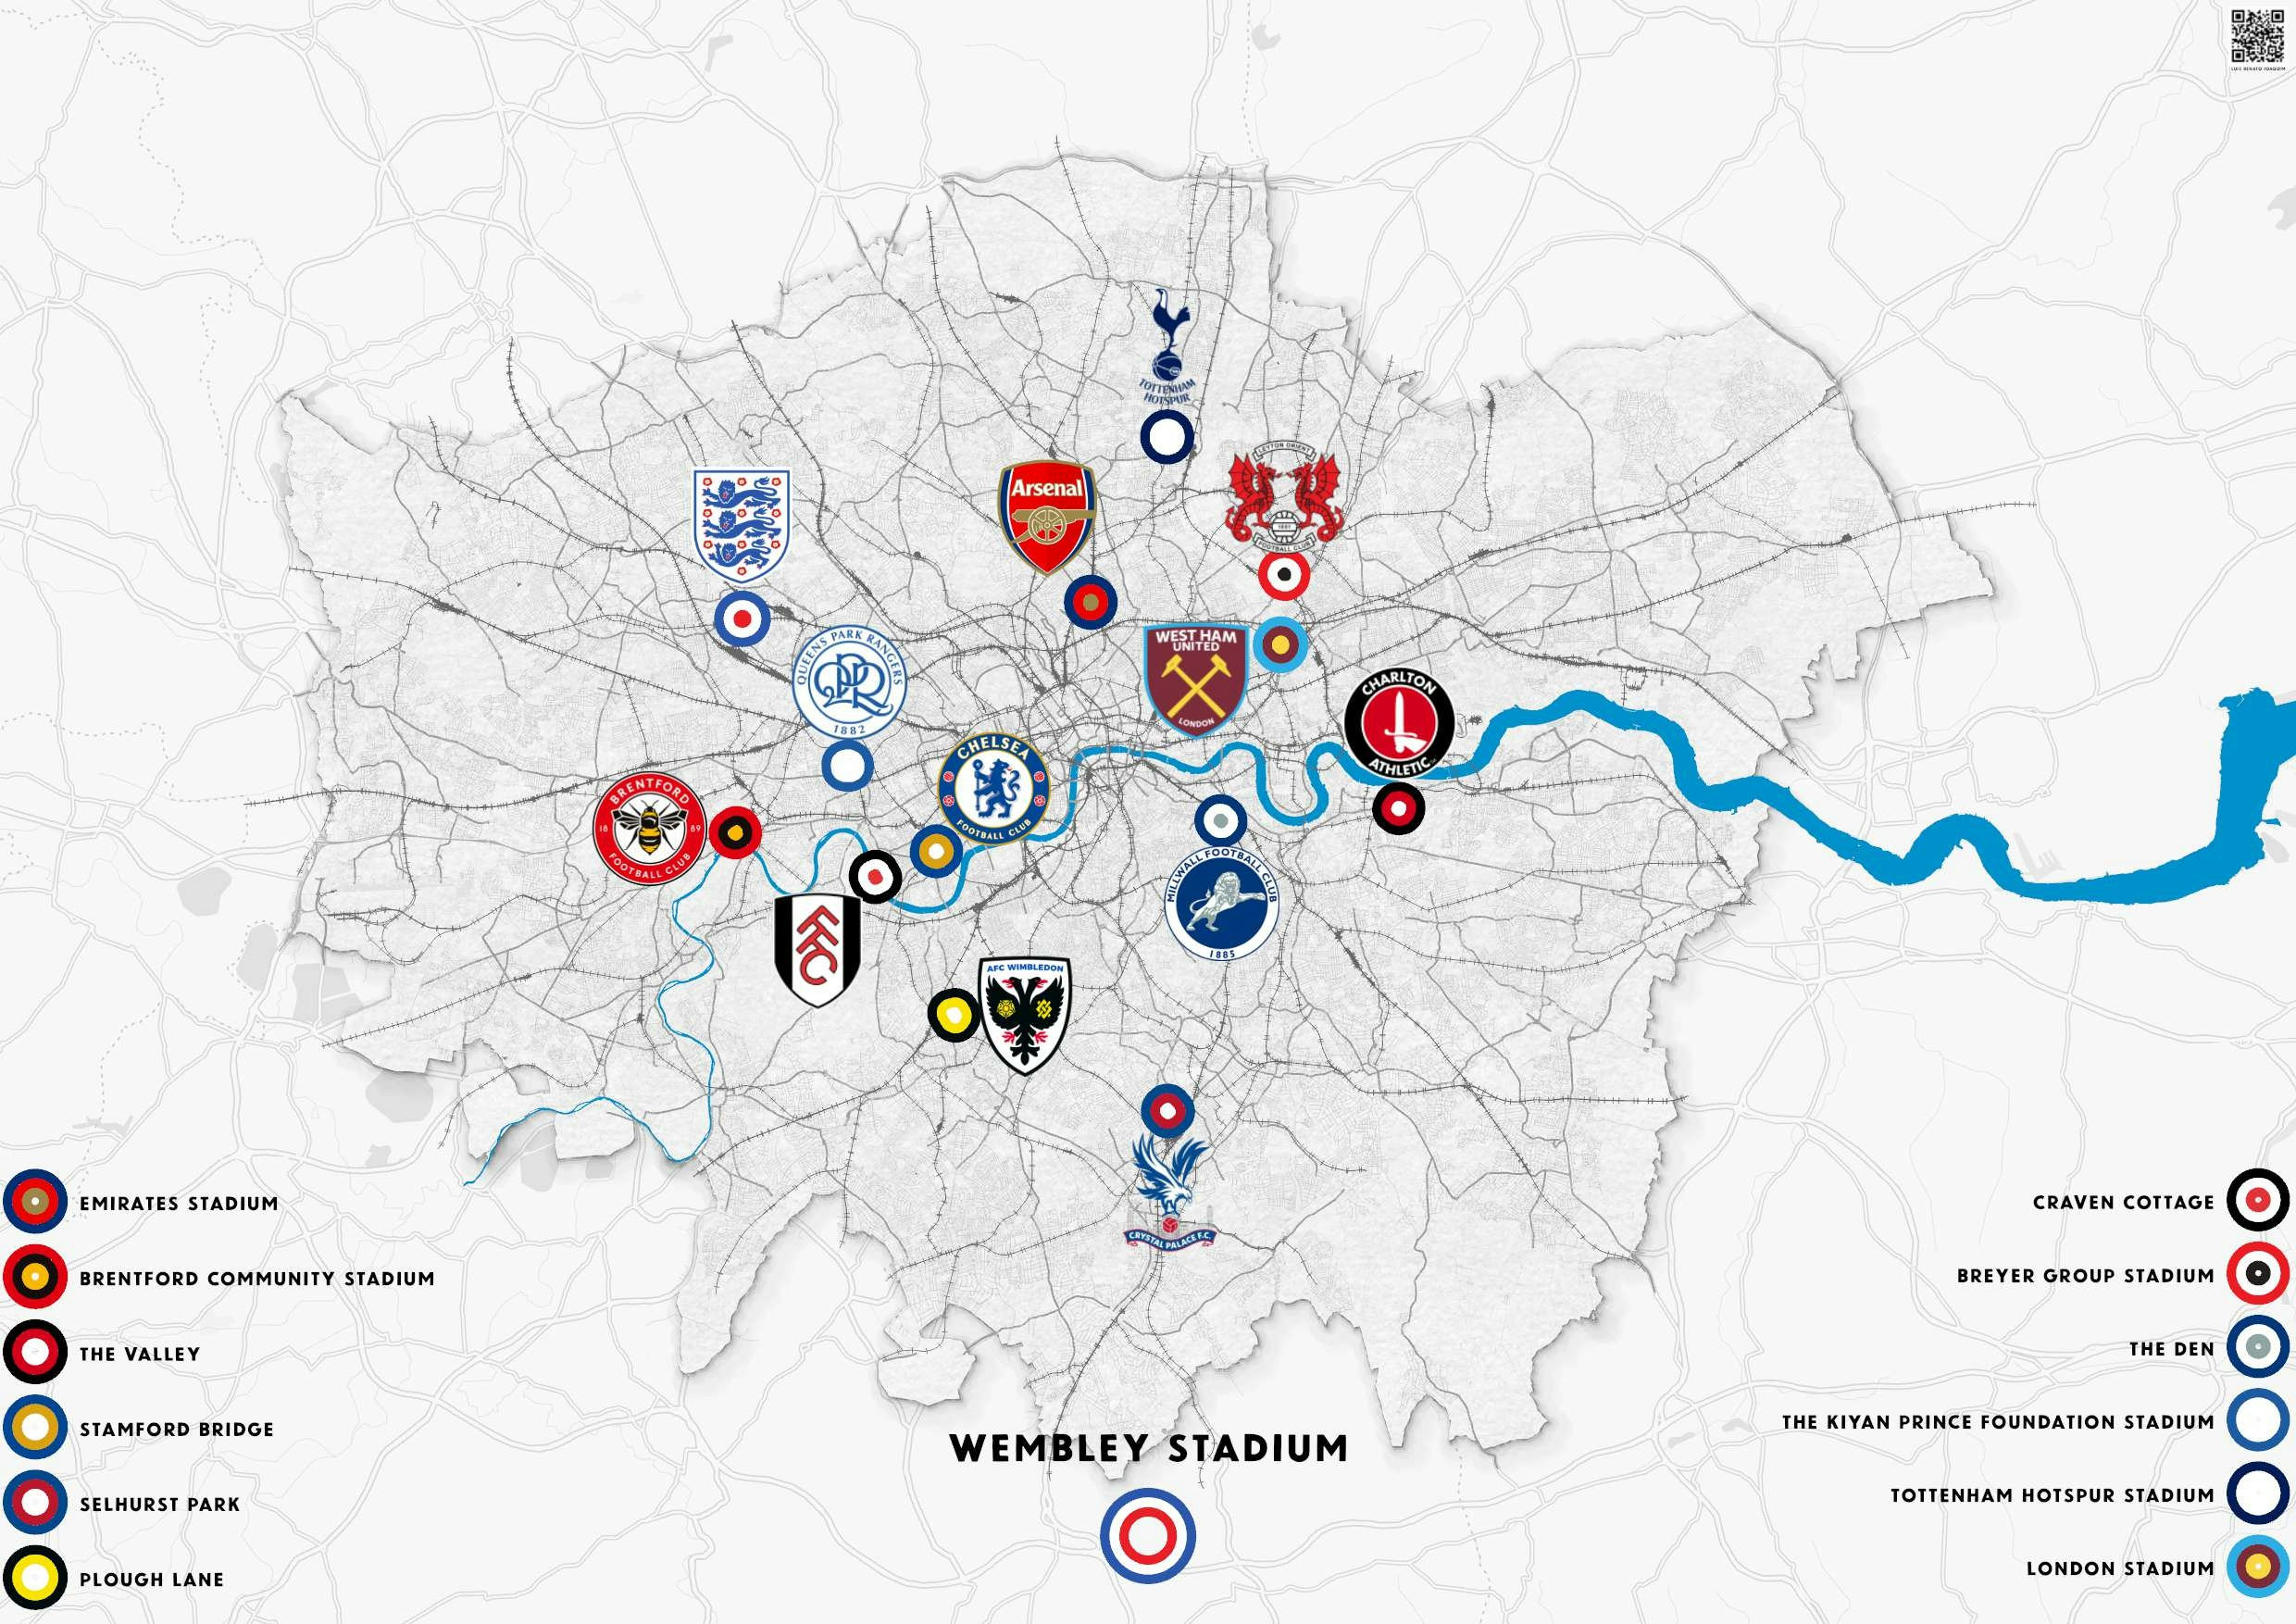 London and its Stadiums